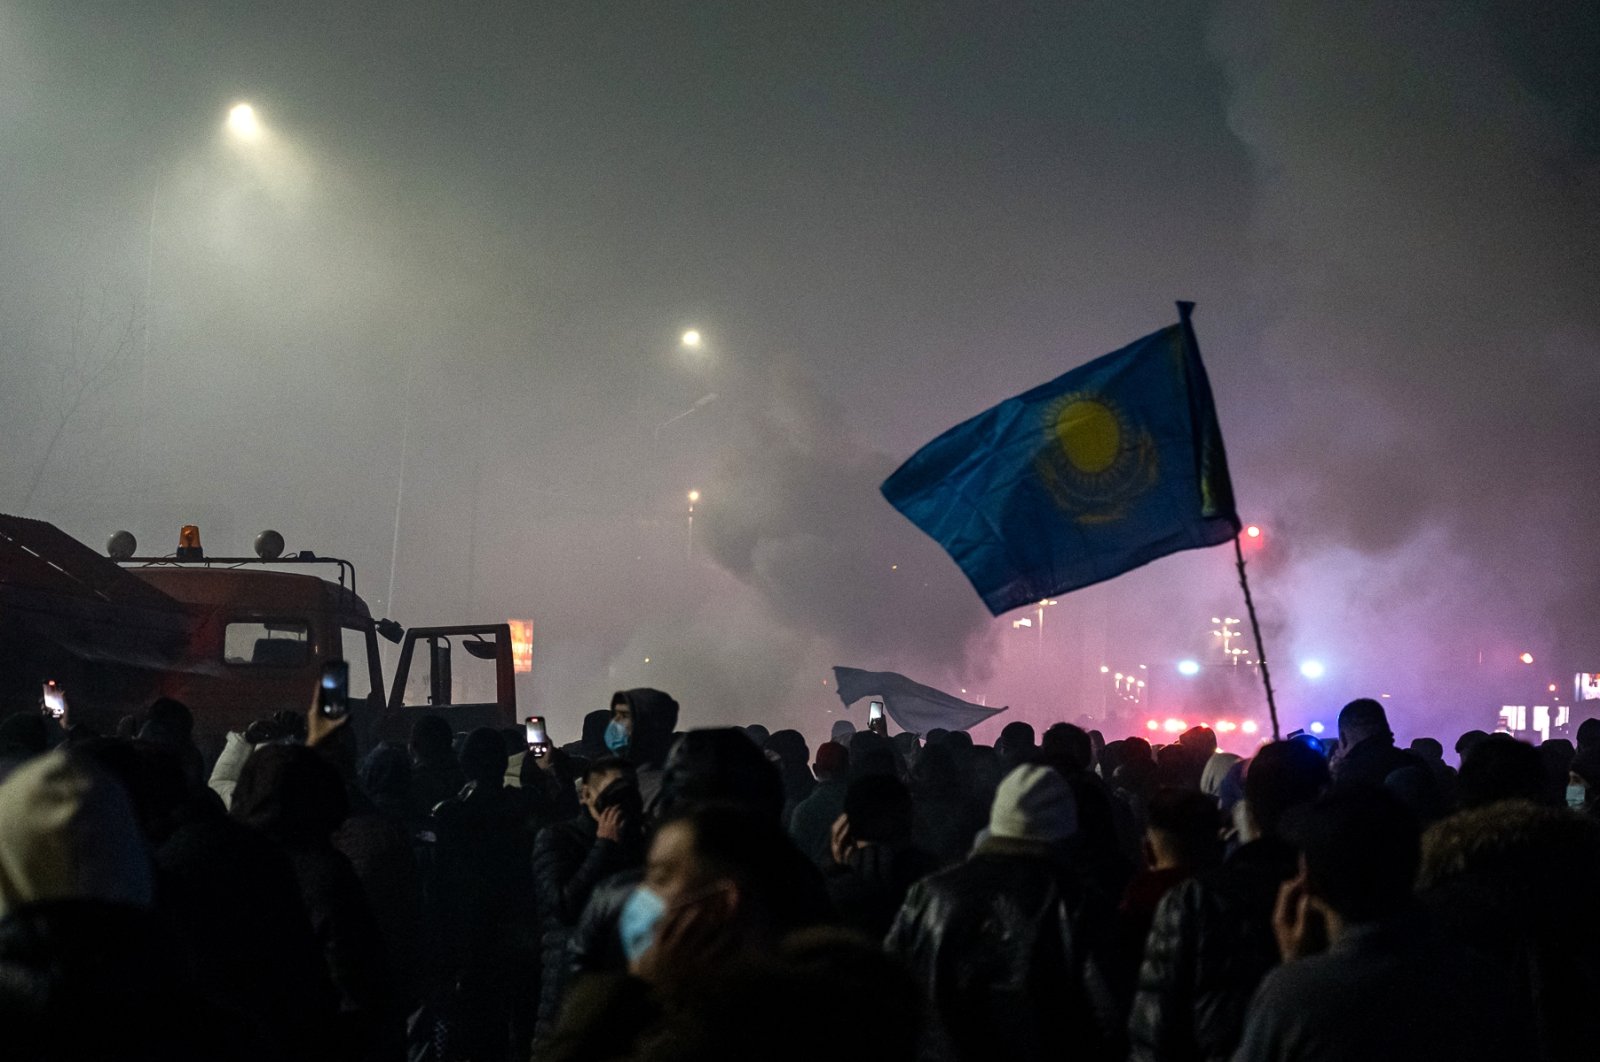 Protesters attend a rally in Almaty on January 4, 2022, after energy price hikes, Kazakhstan. (AFP Photo)